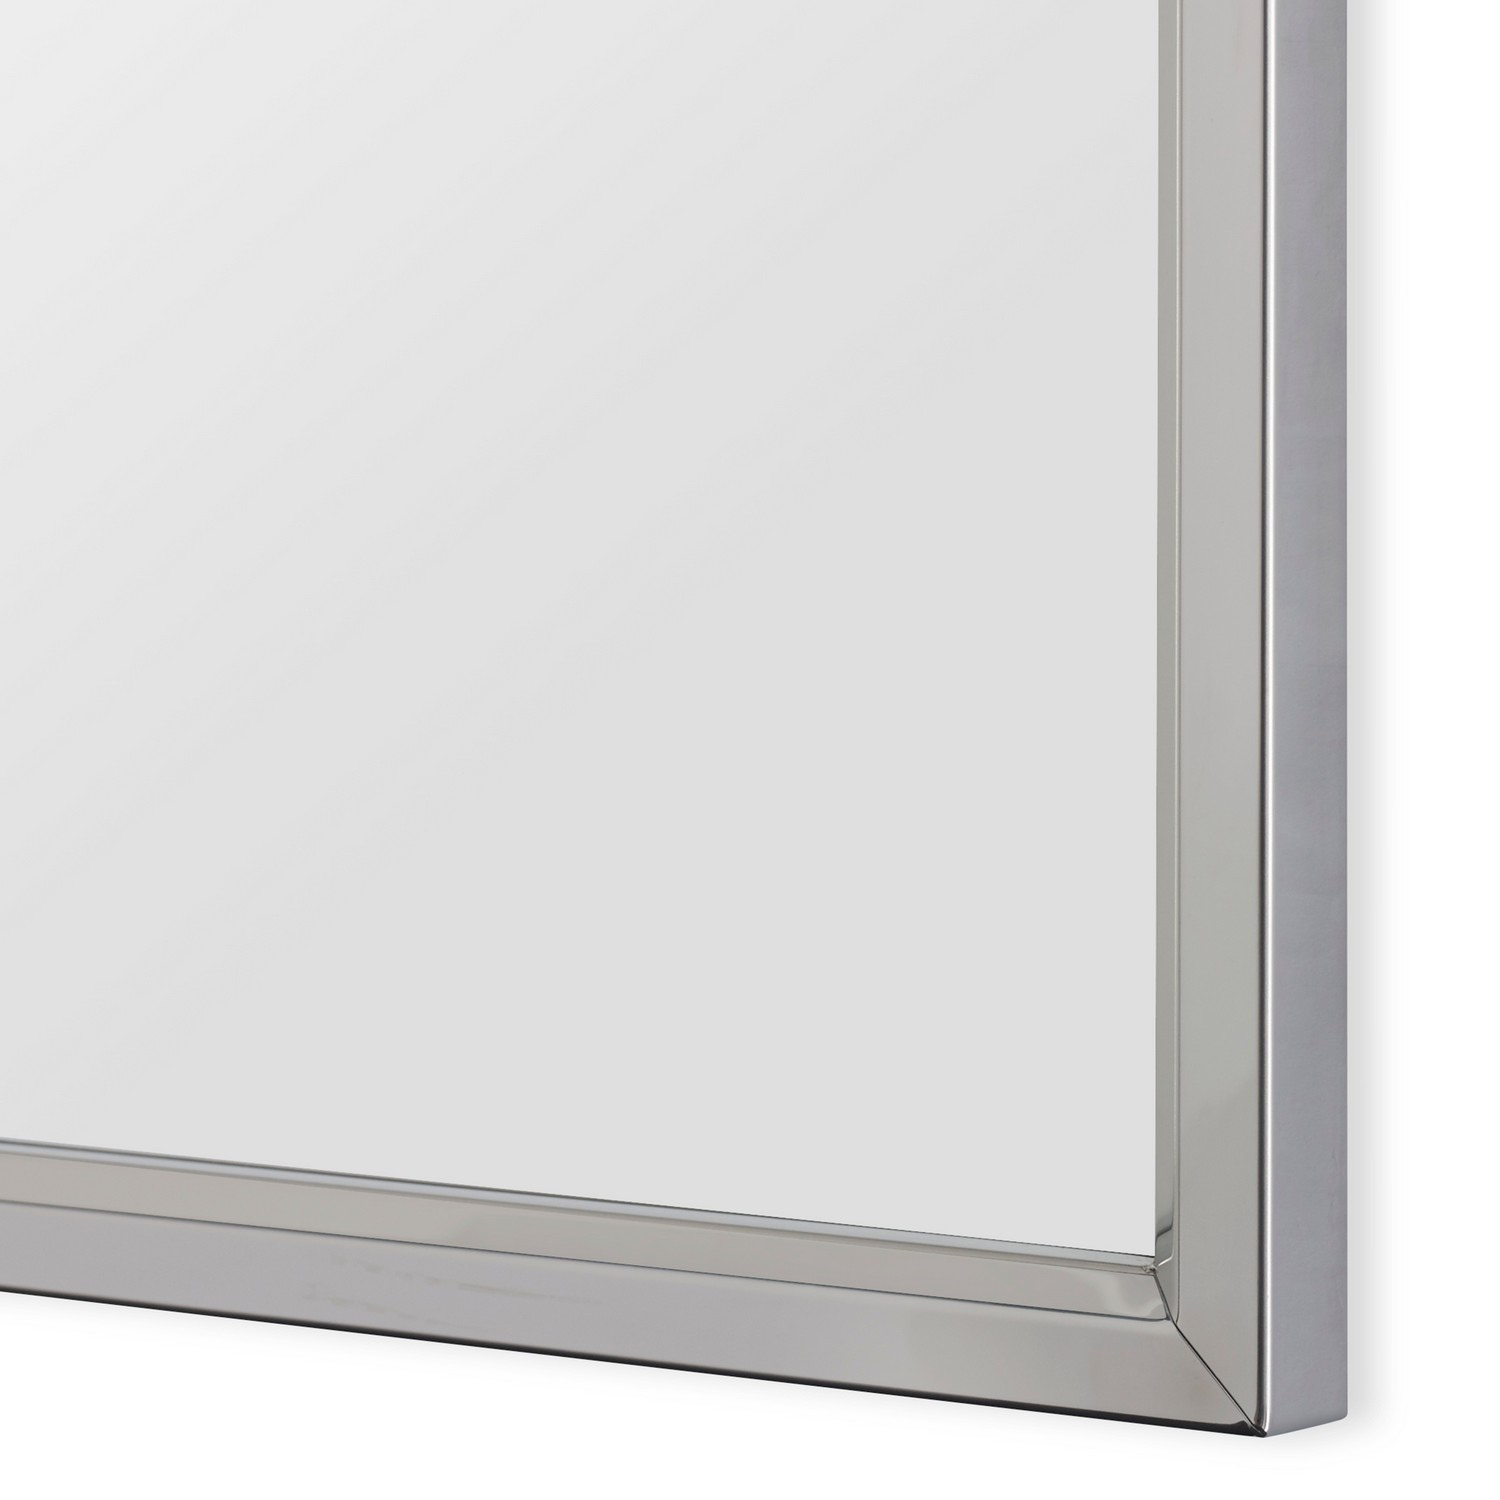 ABC Accent ABC-00493 Mirror - Stainless Steel